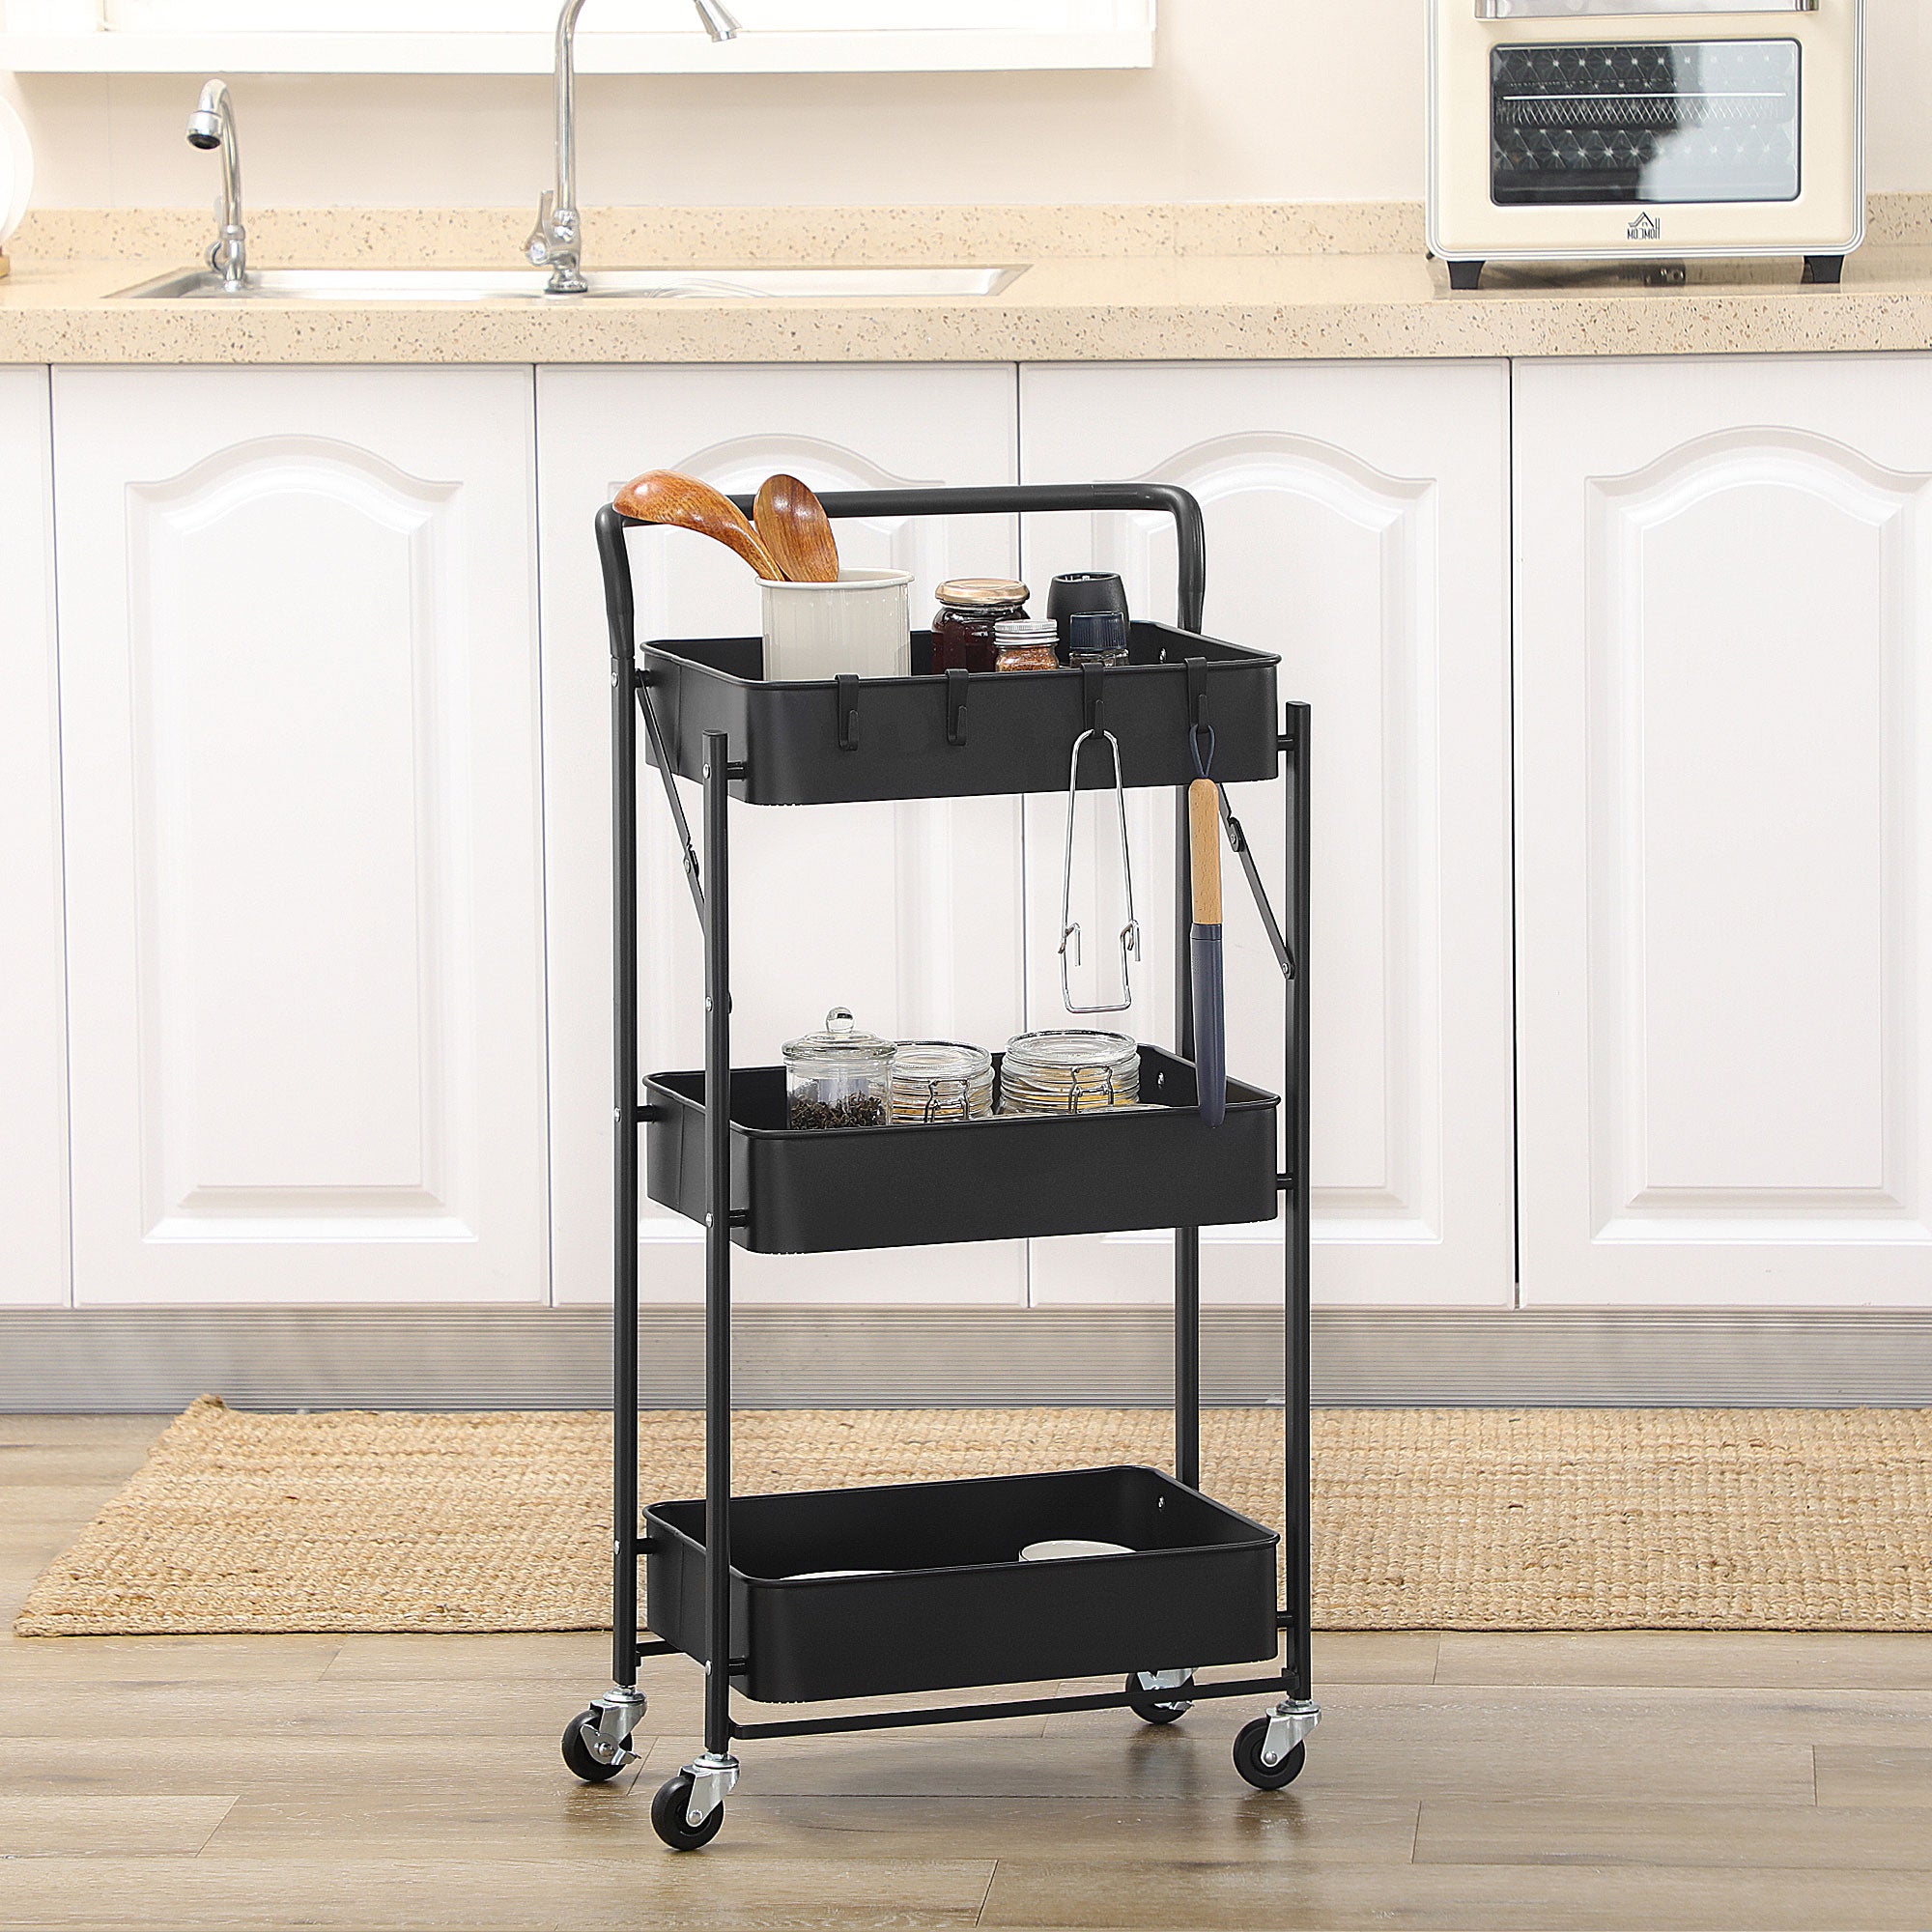 HOMCOM 3 Tier Storage Trolley Cart, Foldable Rolling Utility Cart with 3 Mesh Baskets, 4 Removable Hooks for Living Room, Laundry and Kitchen, Black